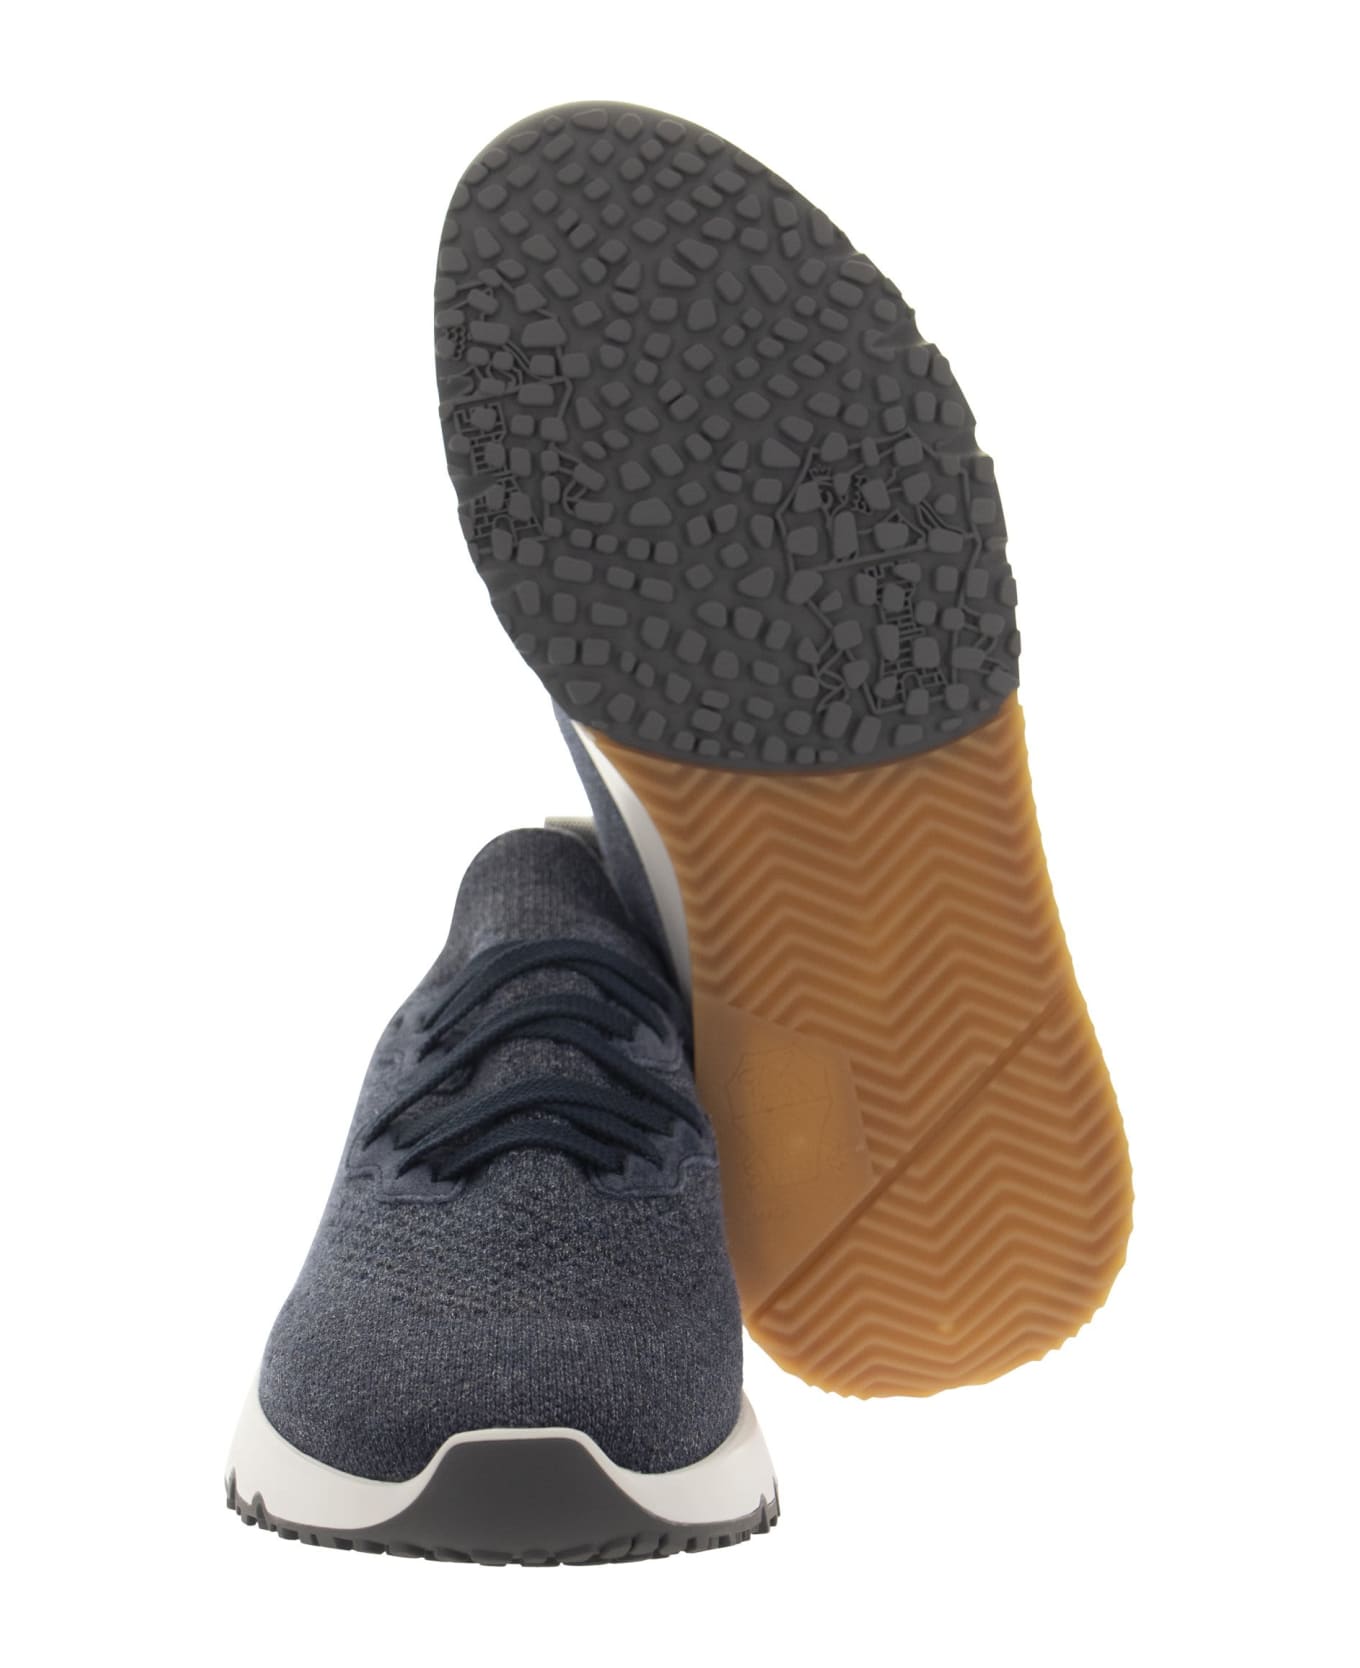 Brunello Cucinelli Mesh Knitted Sneakers - Blue スニーカー